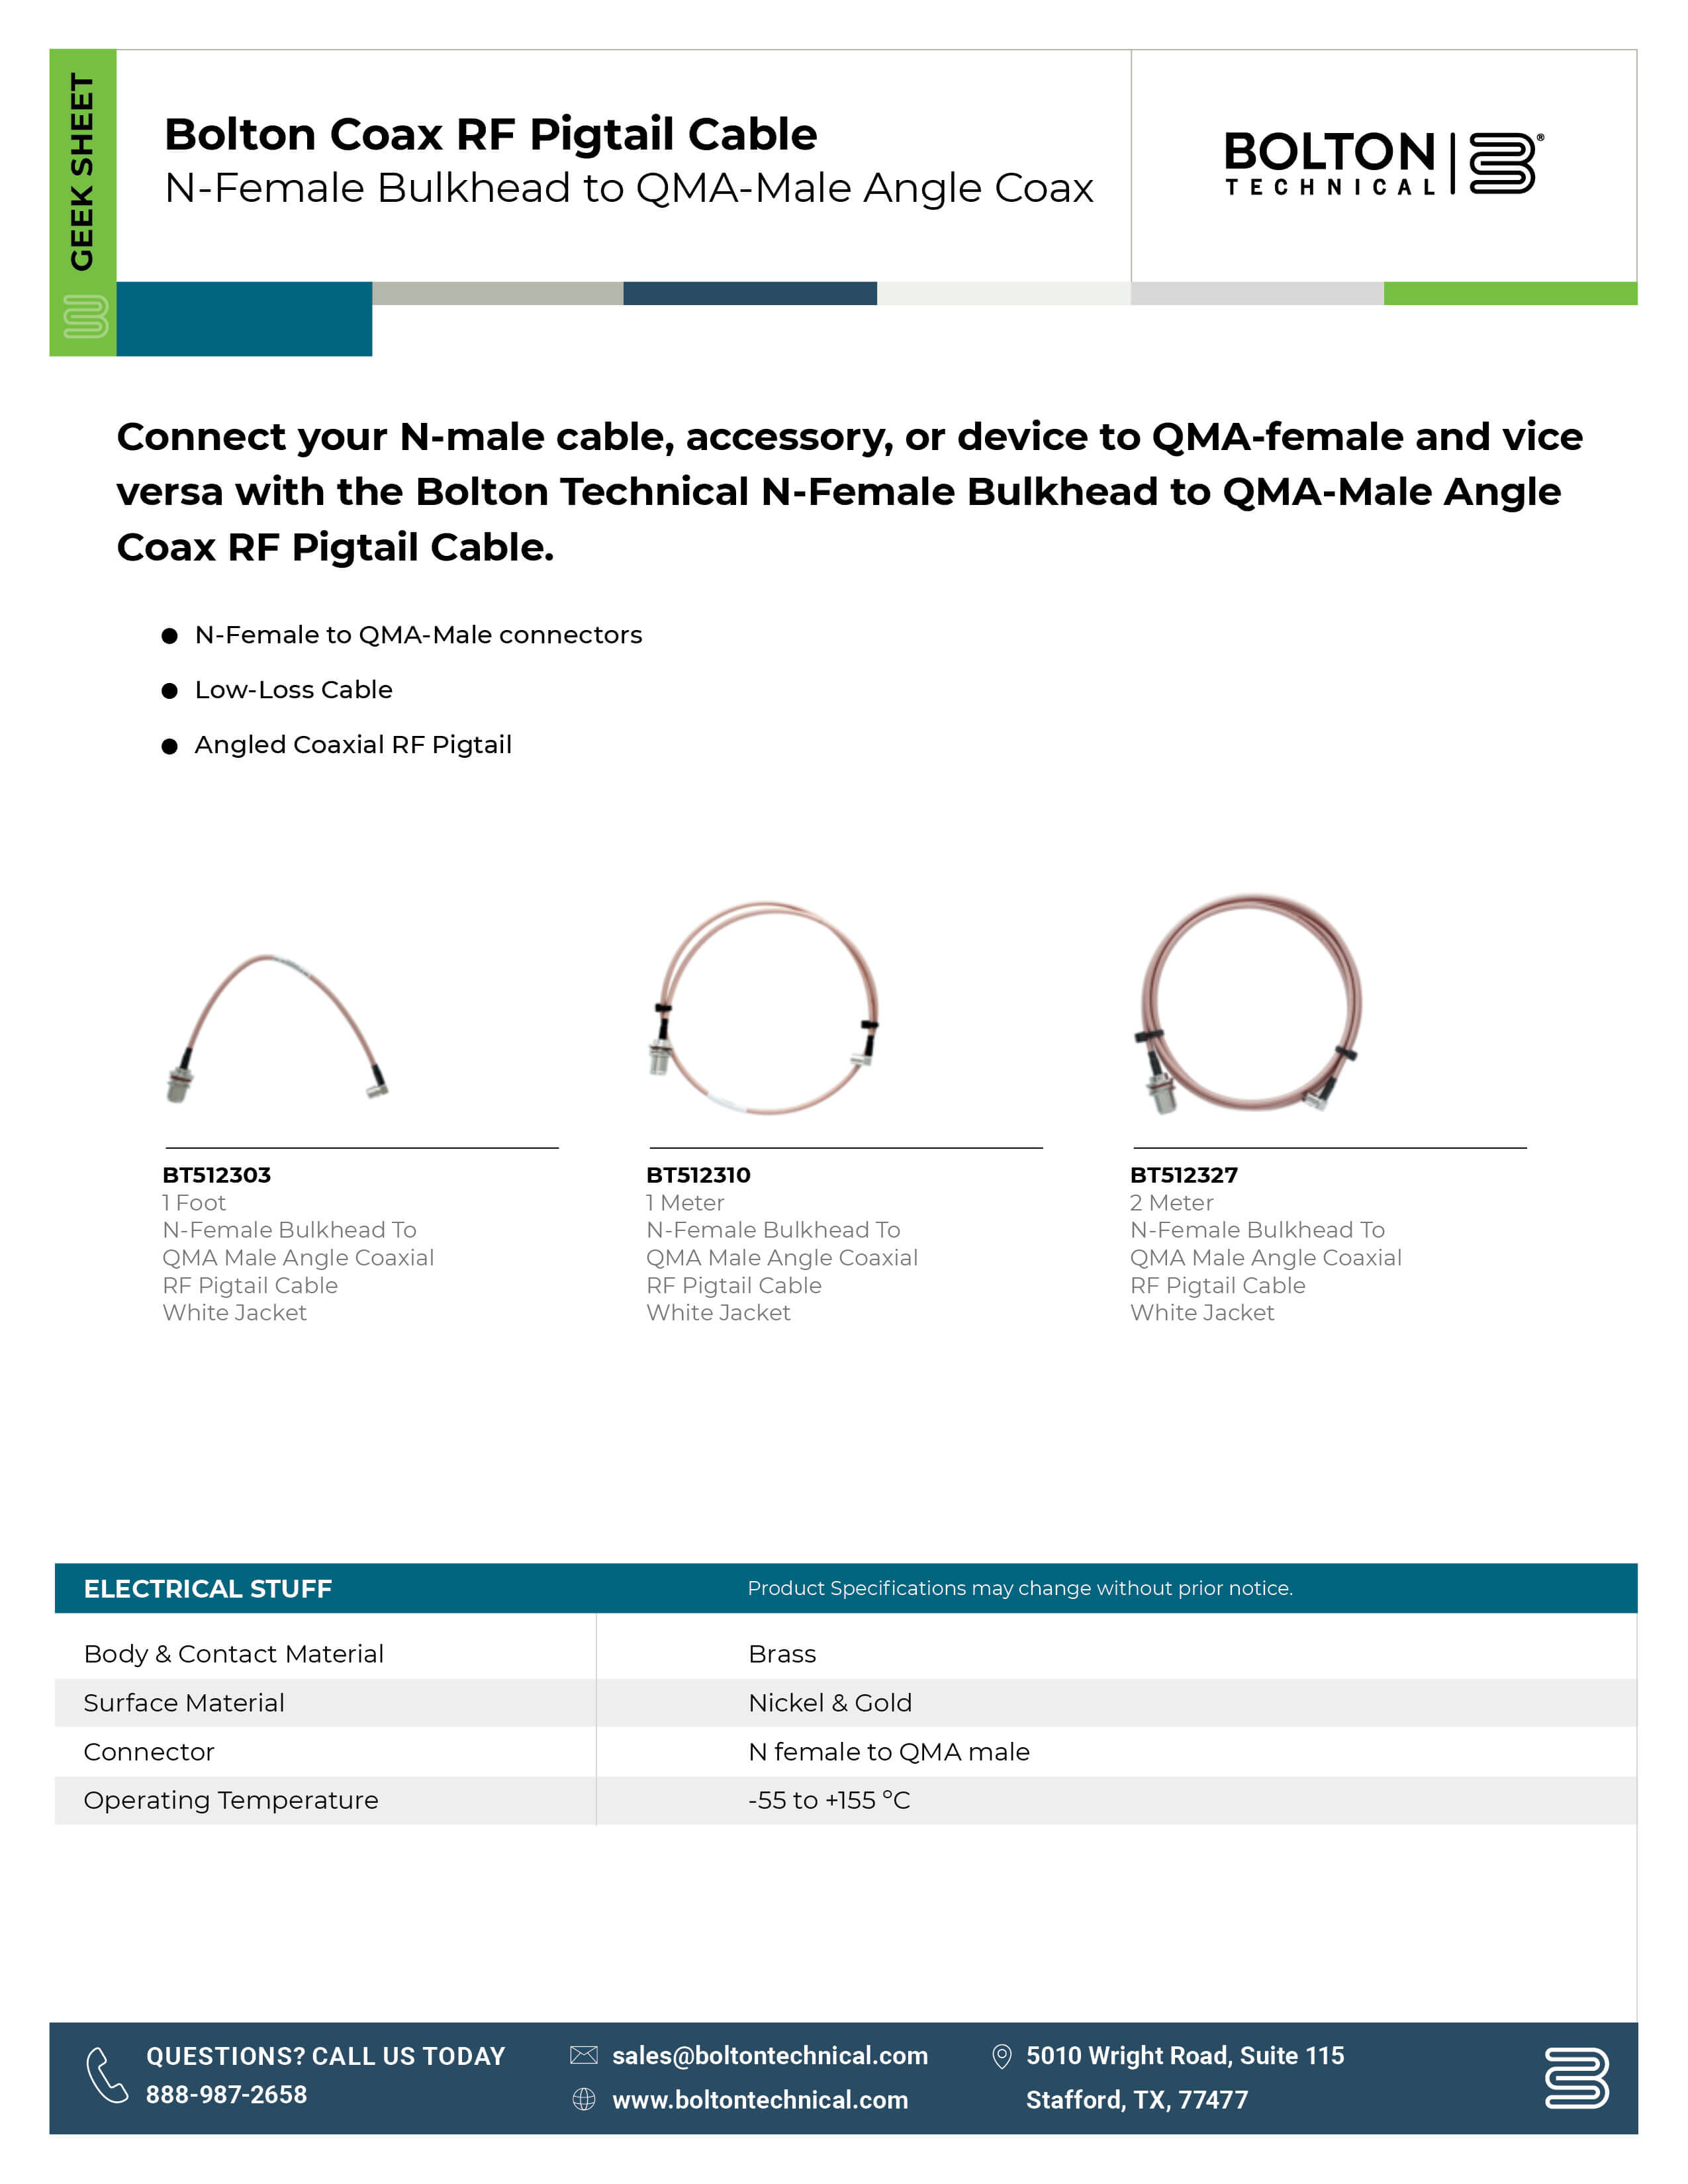 bolton pigtail cable specifications